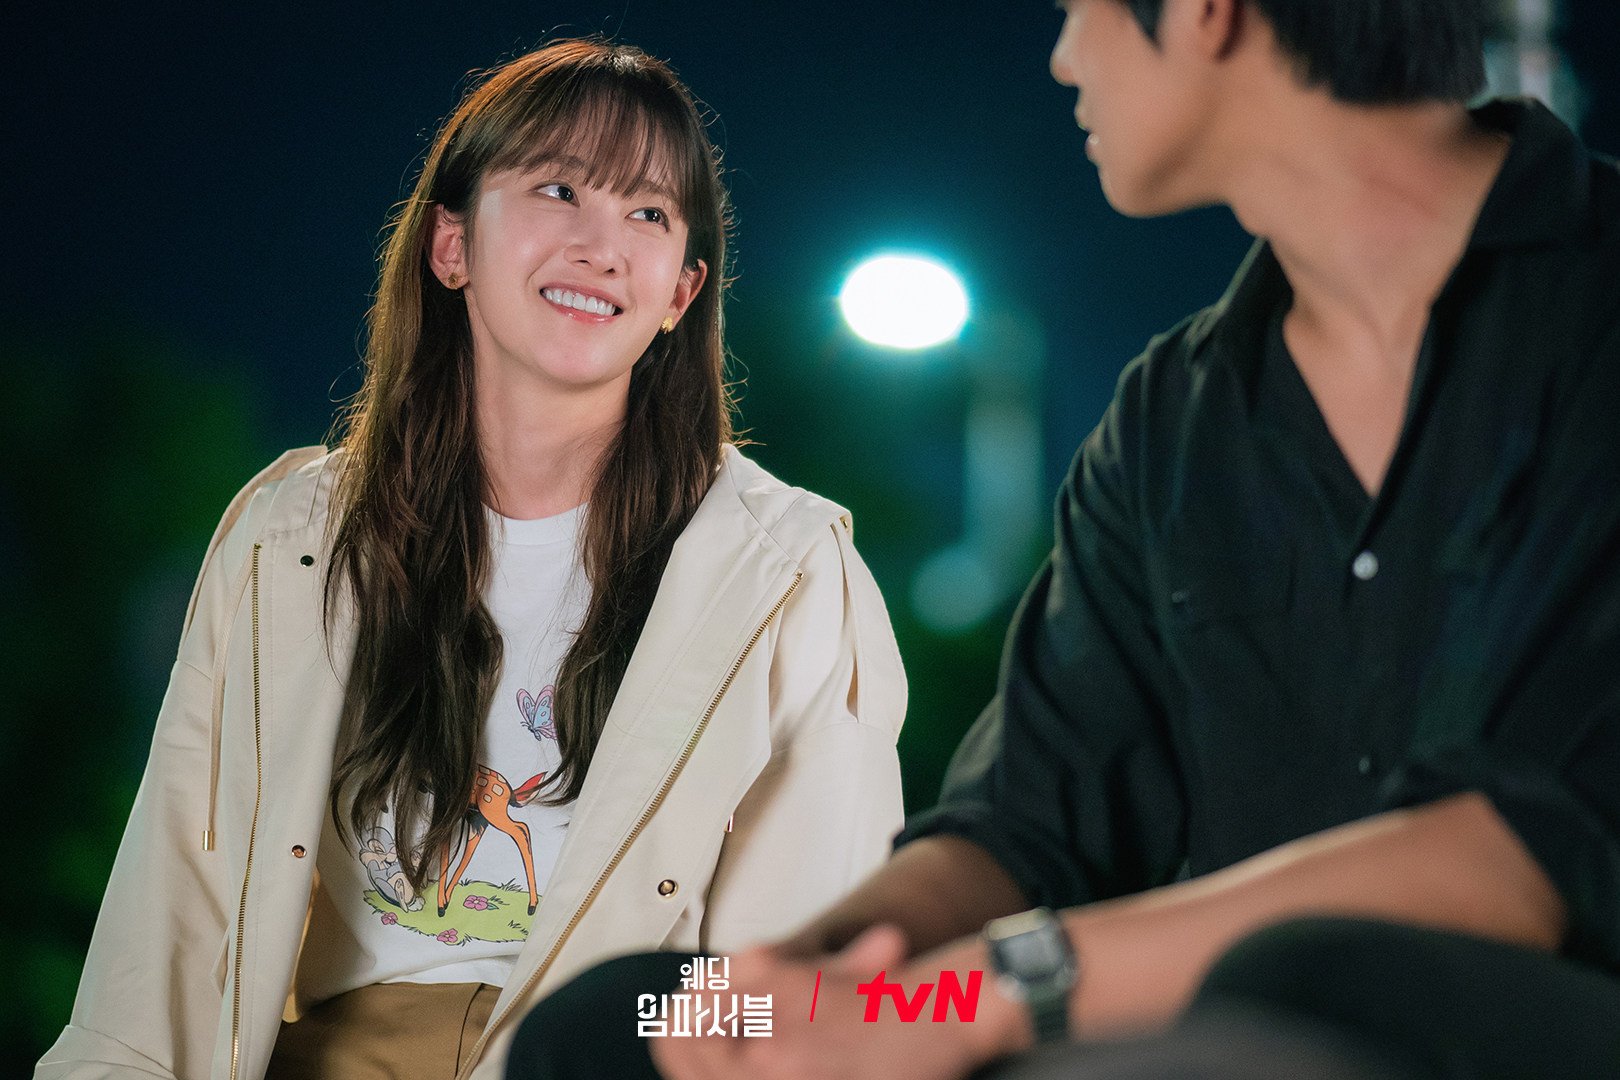 Jeon Jong-seo as struggling actress Na A-jeong, and Moon Sang-min as Lee Ji-han, the gay corporate heir’s brother she falls in love with, in a still from Wedding Impossible. The Amazon Prime K-drama starts off fun, but meanders its way to an unsatisfying end.